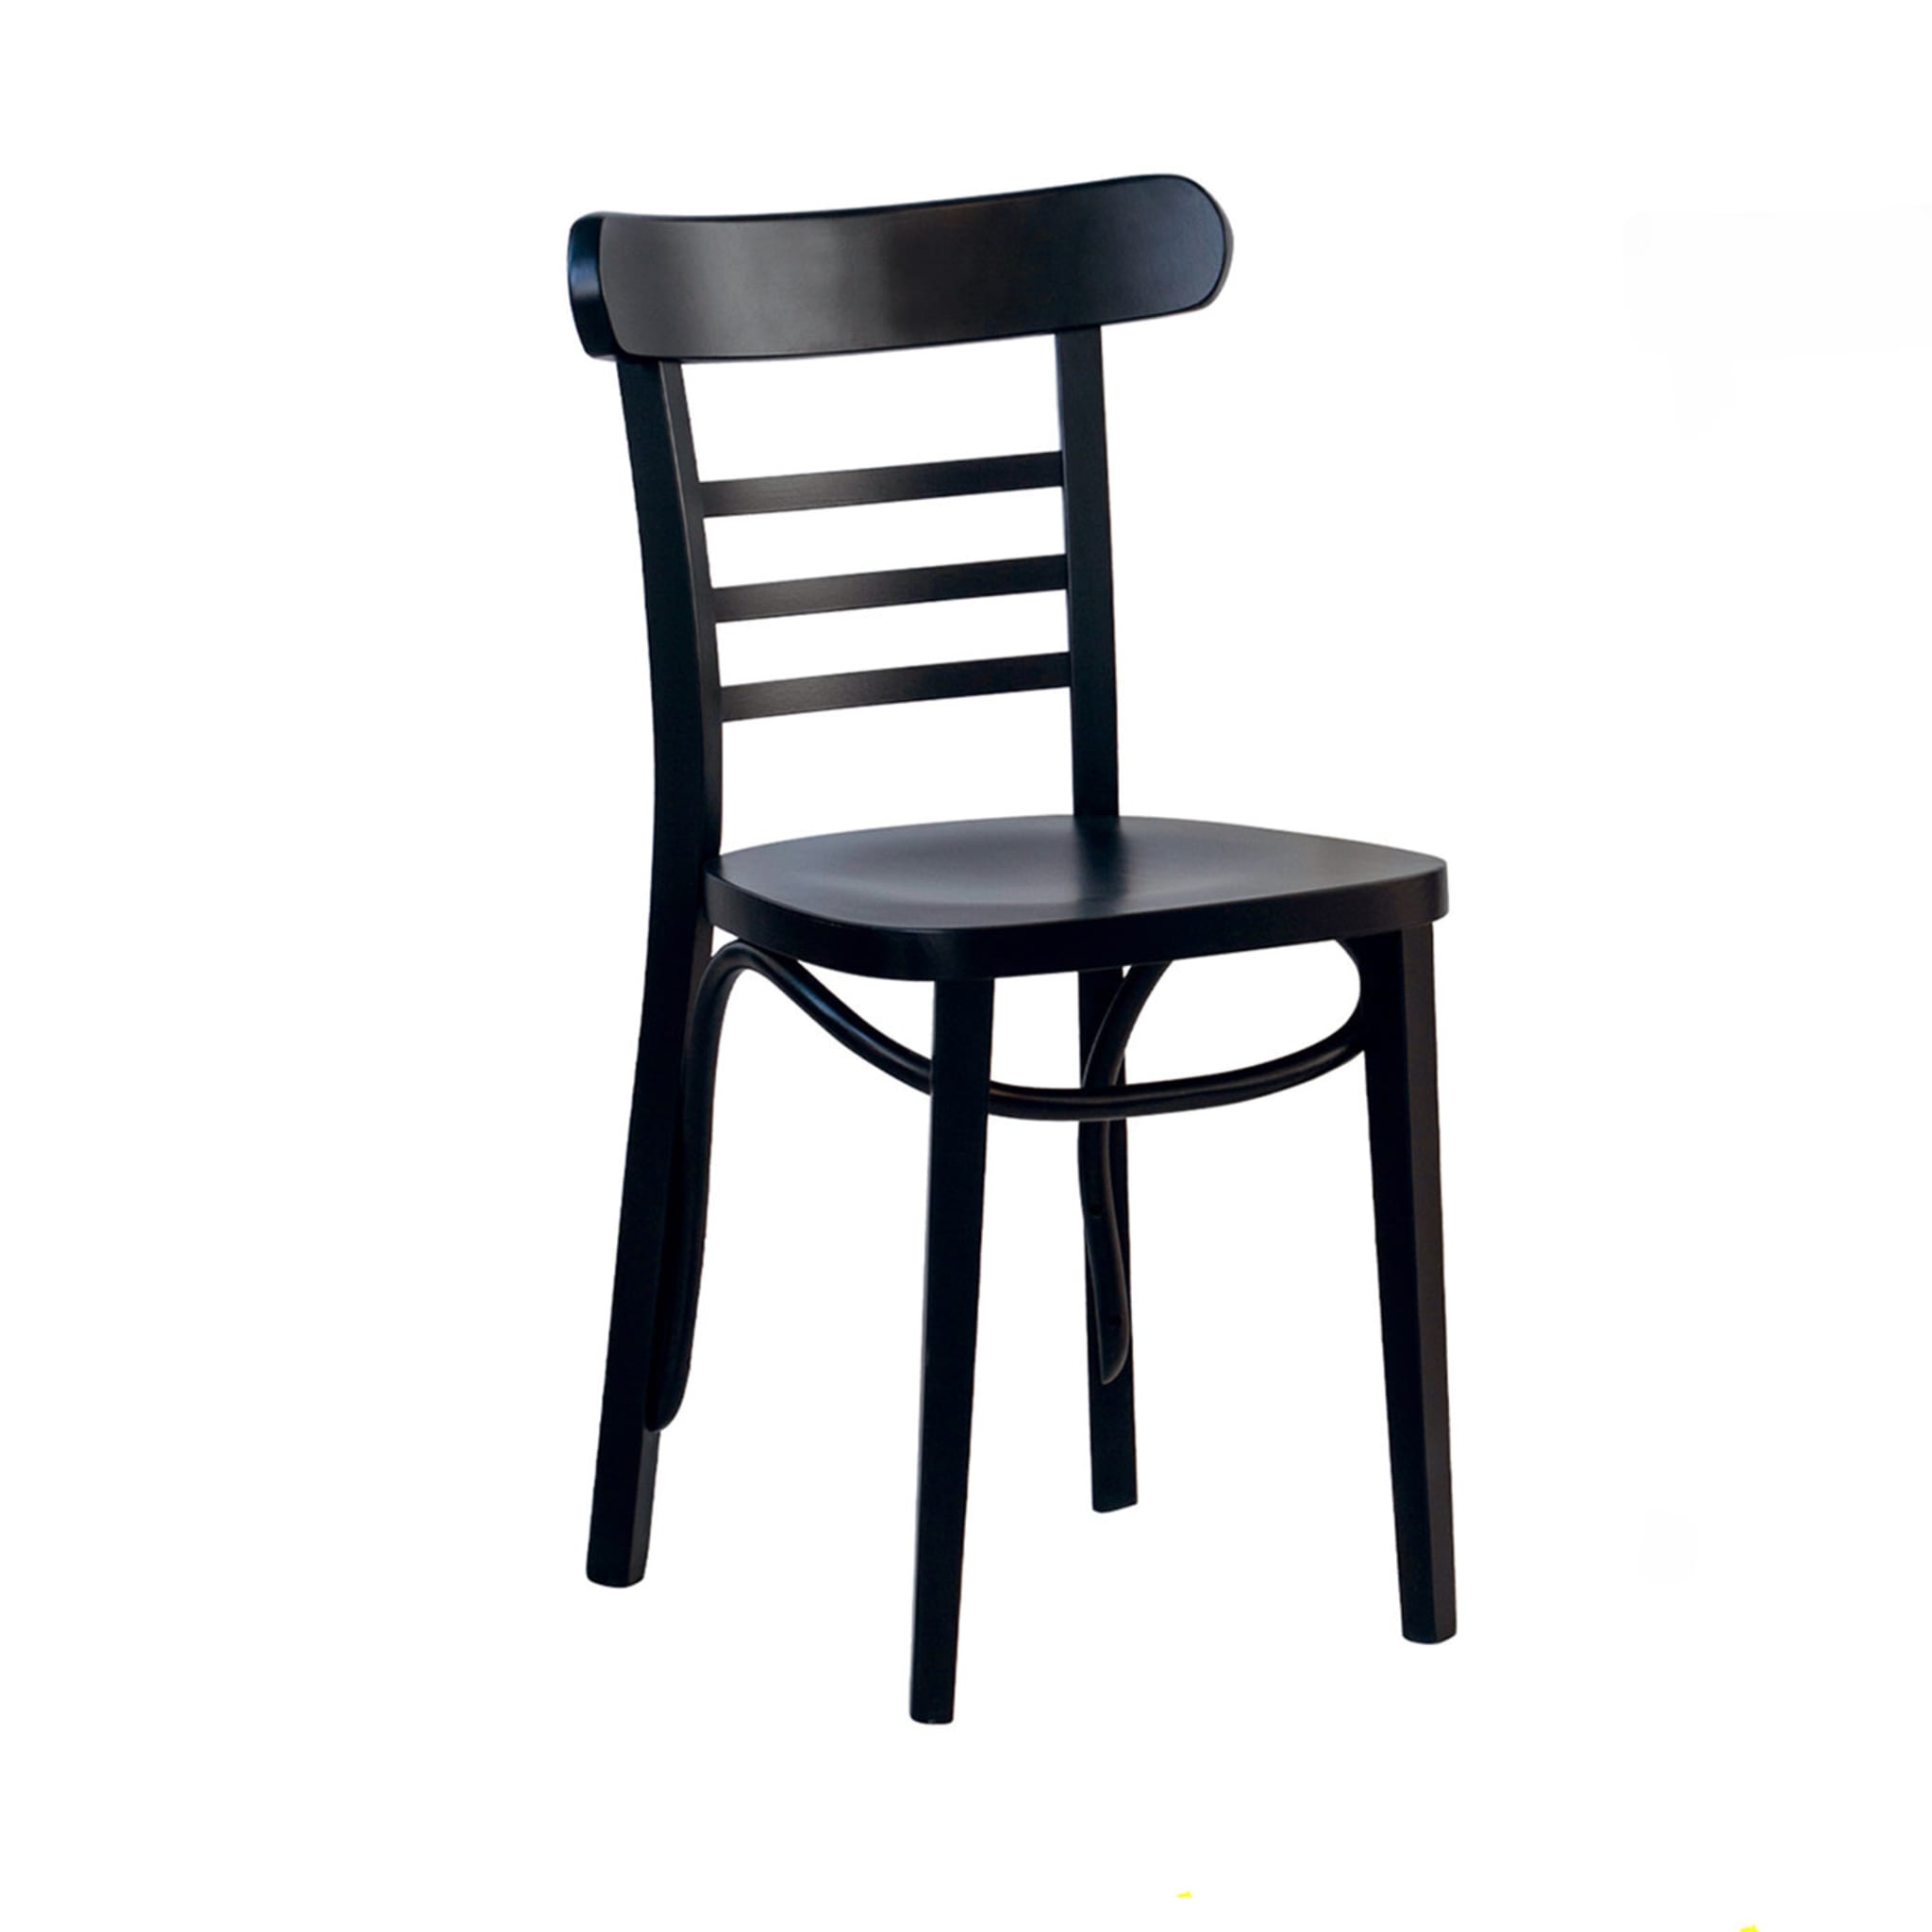 Set of 2 Black Ladder Chairs - Main view